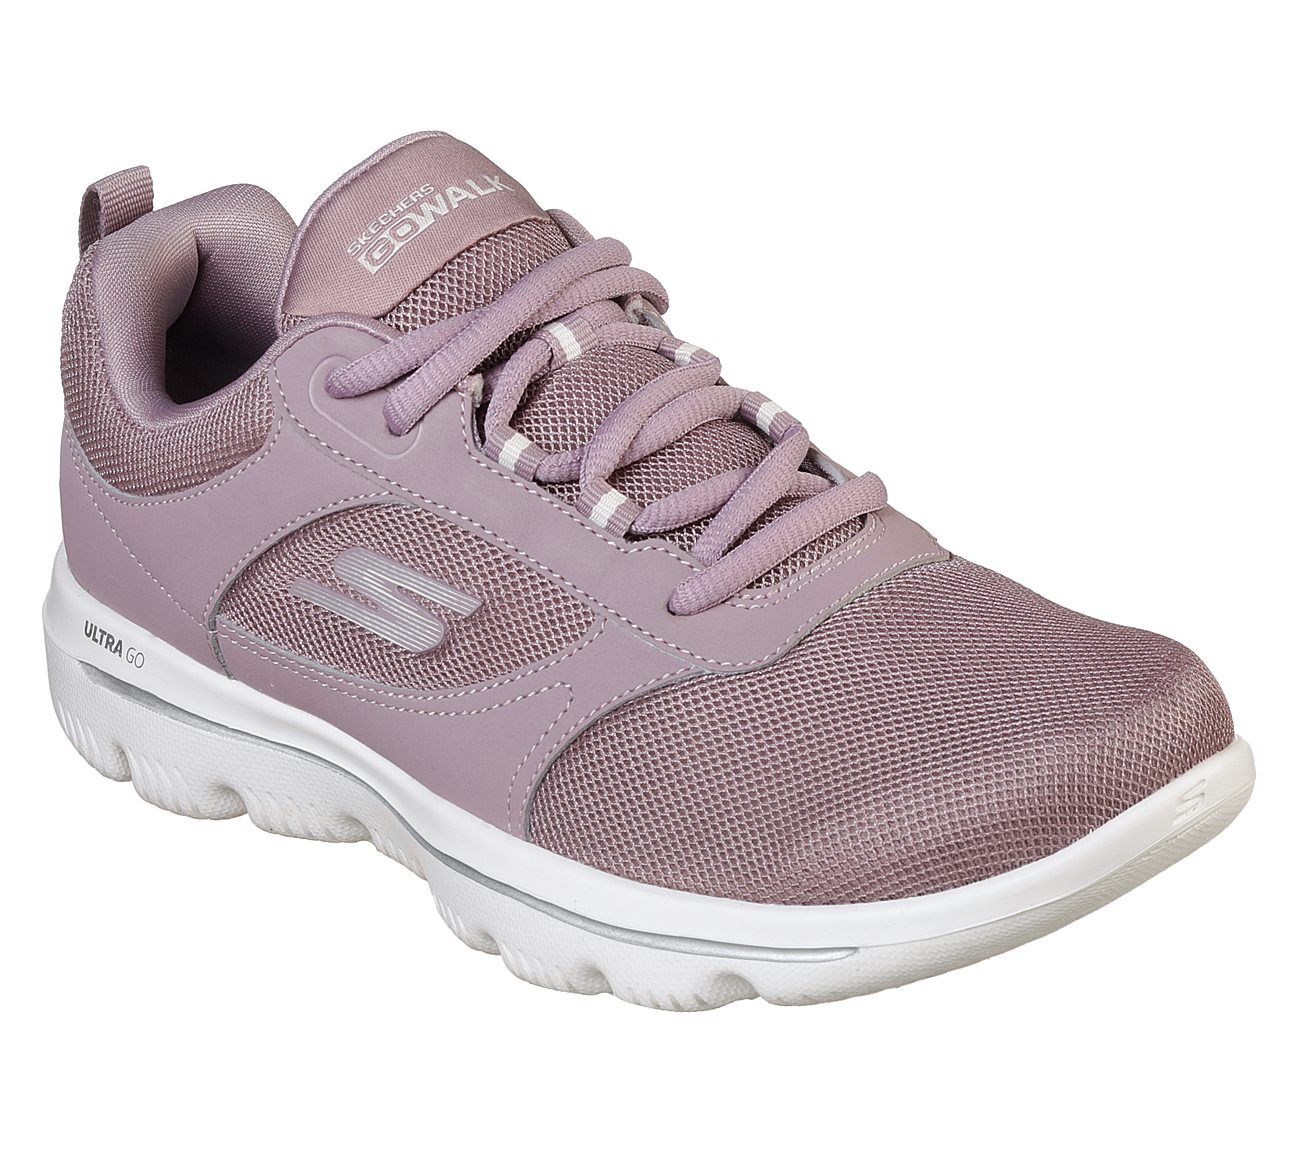 Buy > g fore ladies golf shoes > in stock